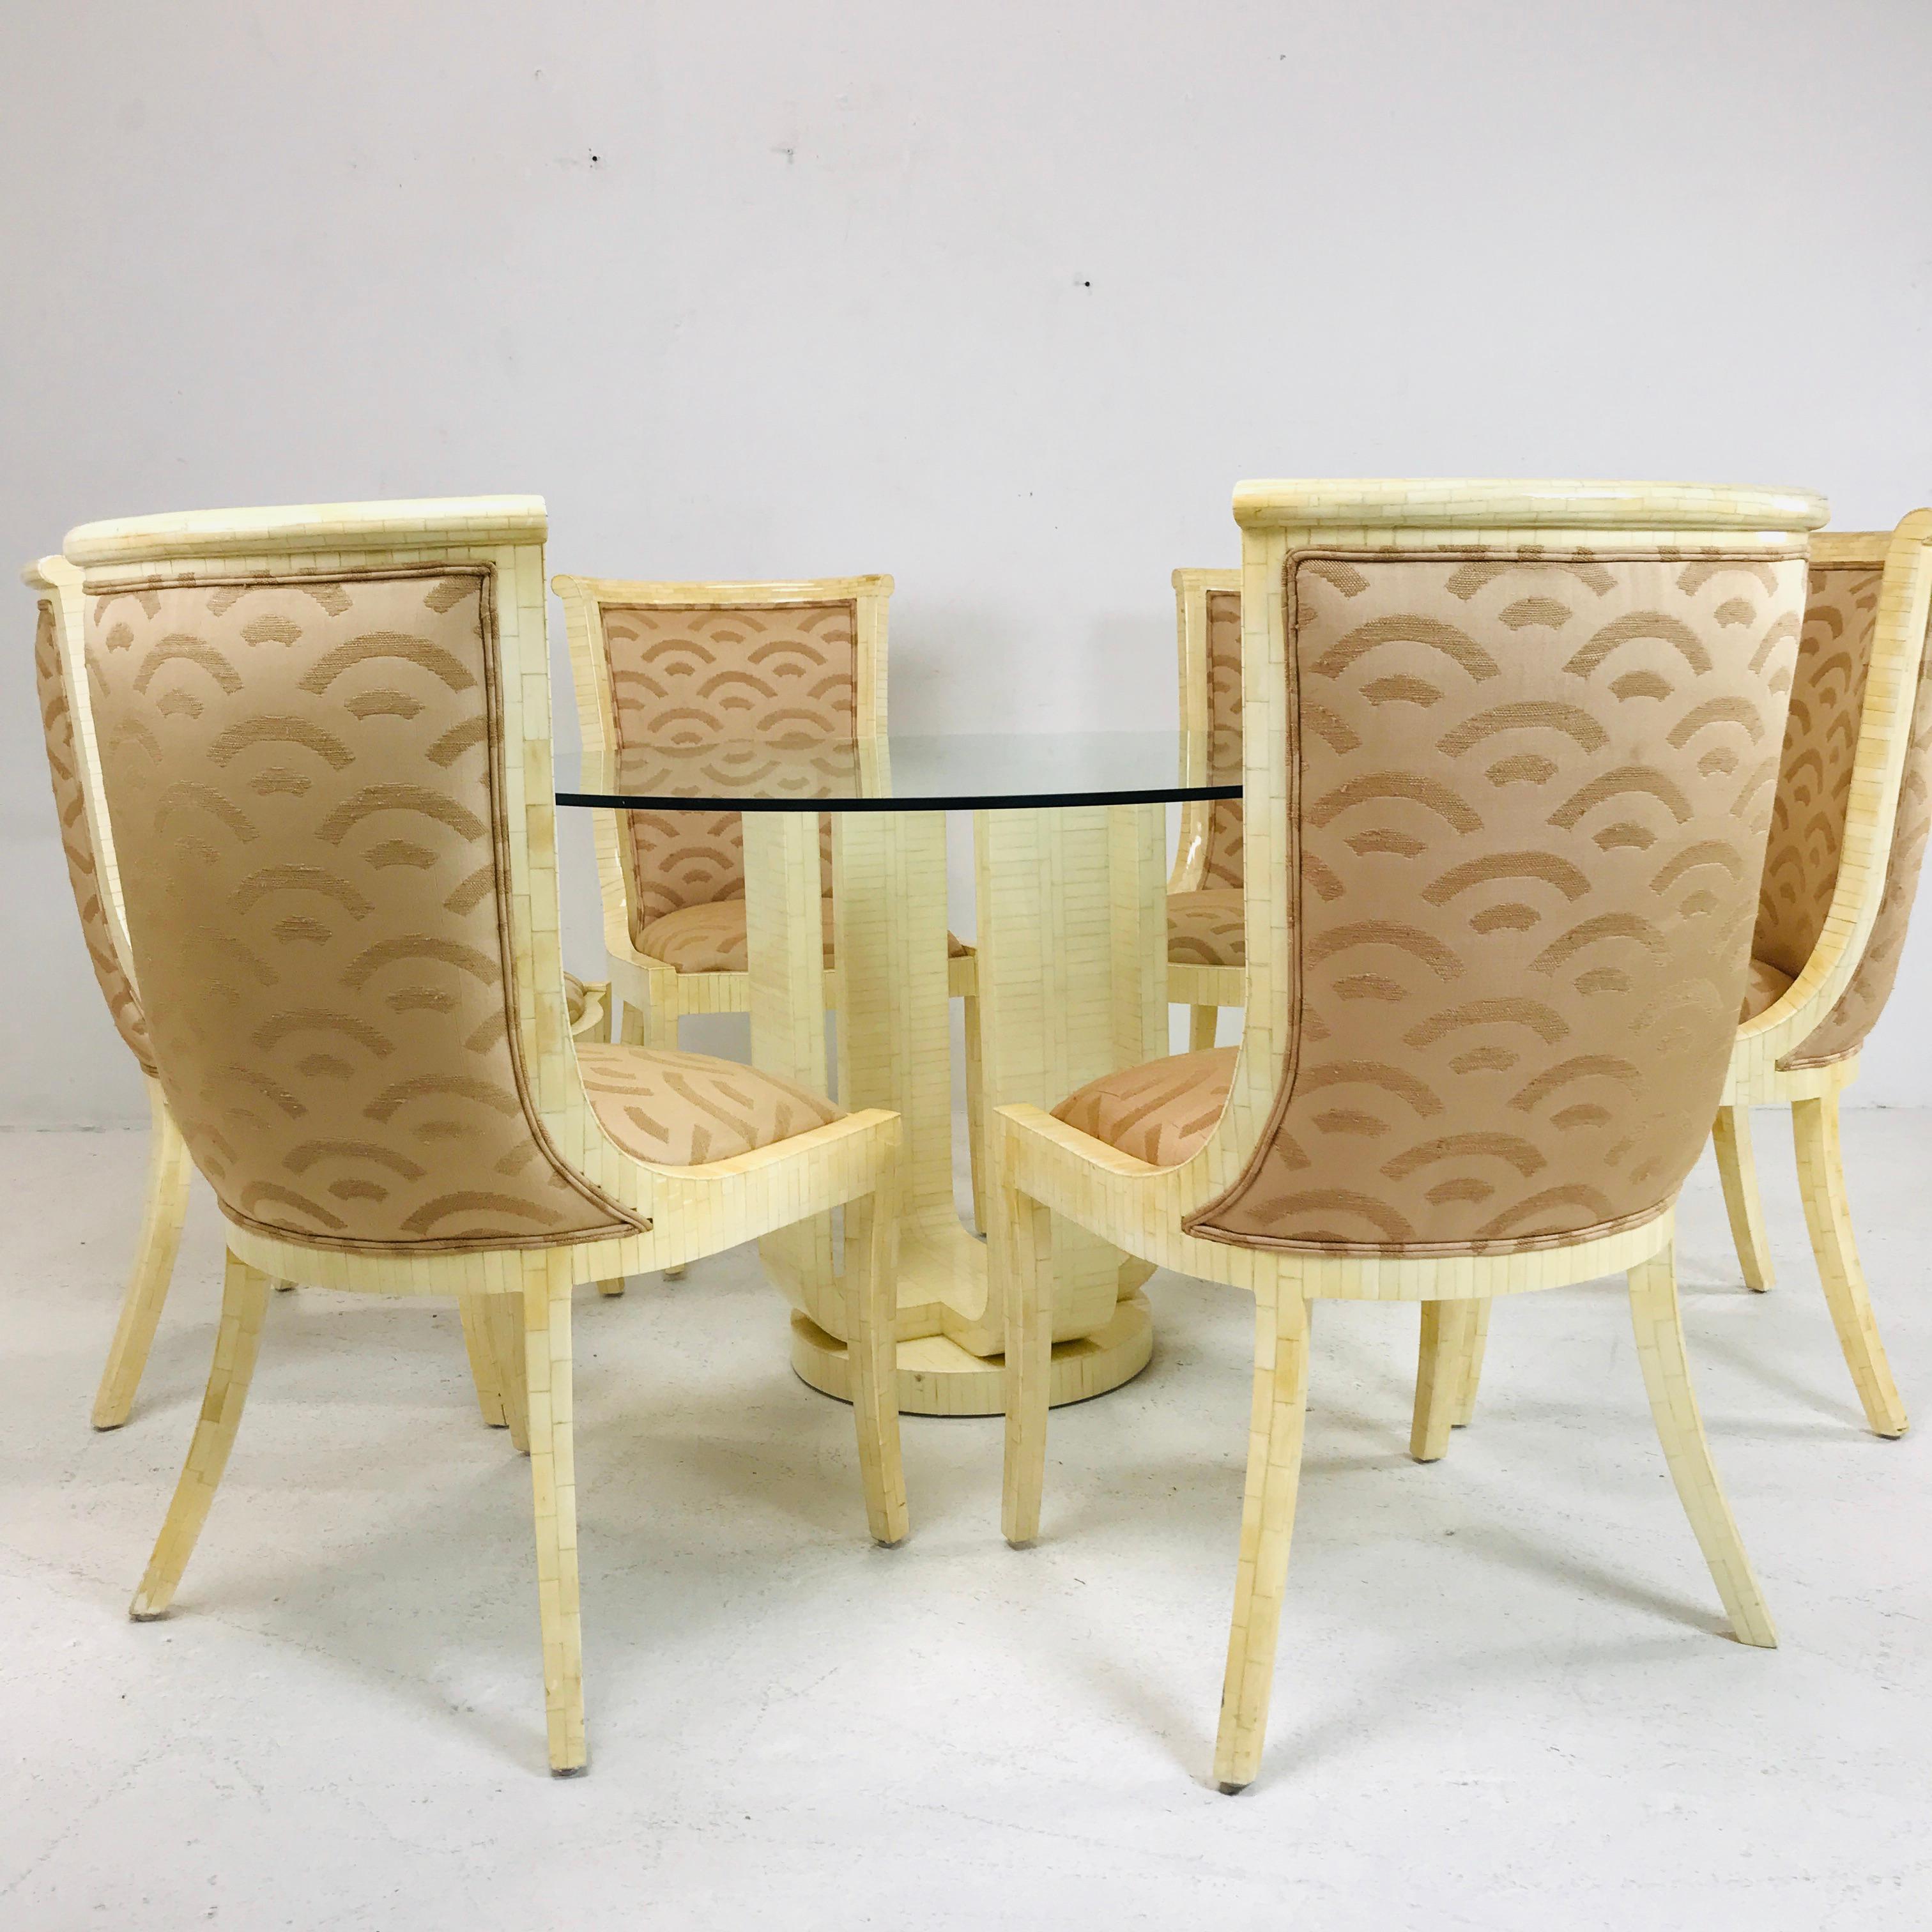 1980's Enrique Garcel tessellated bone pedestal dining table with glass top. Base measures 20